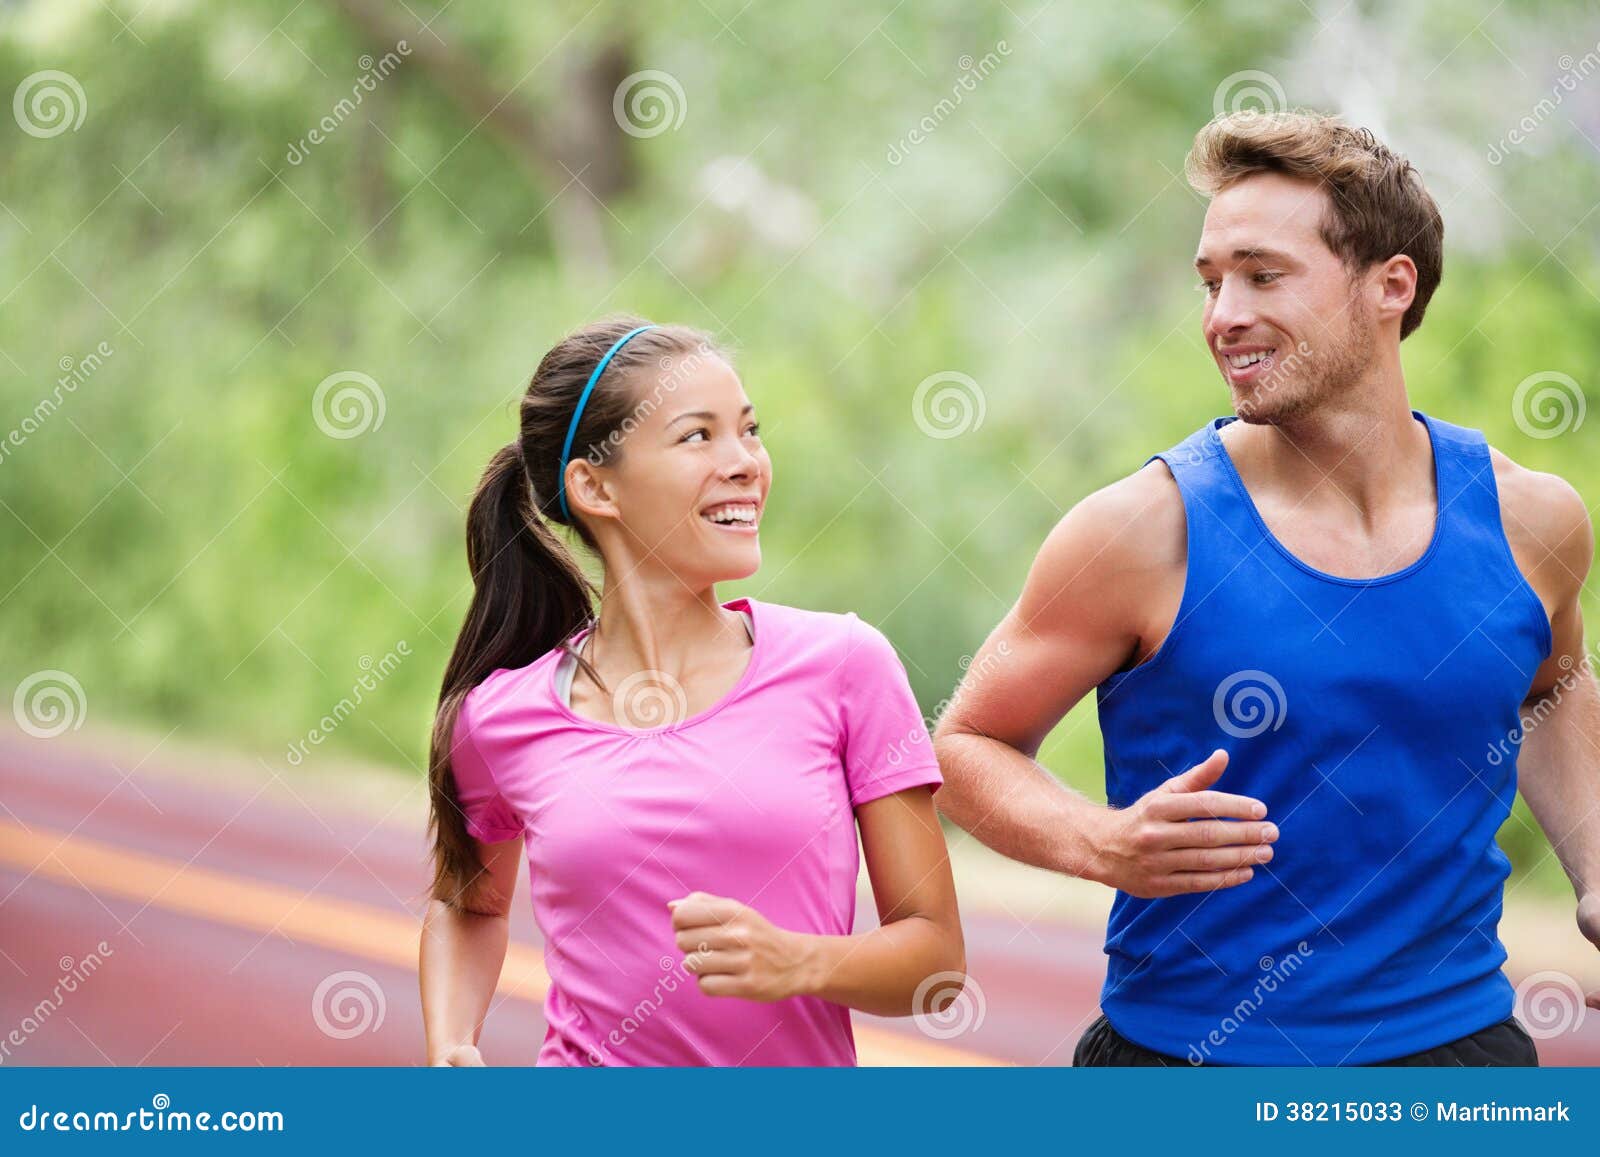 Healthy lifestyle - Running fitness couple jogging laughing, talking ...